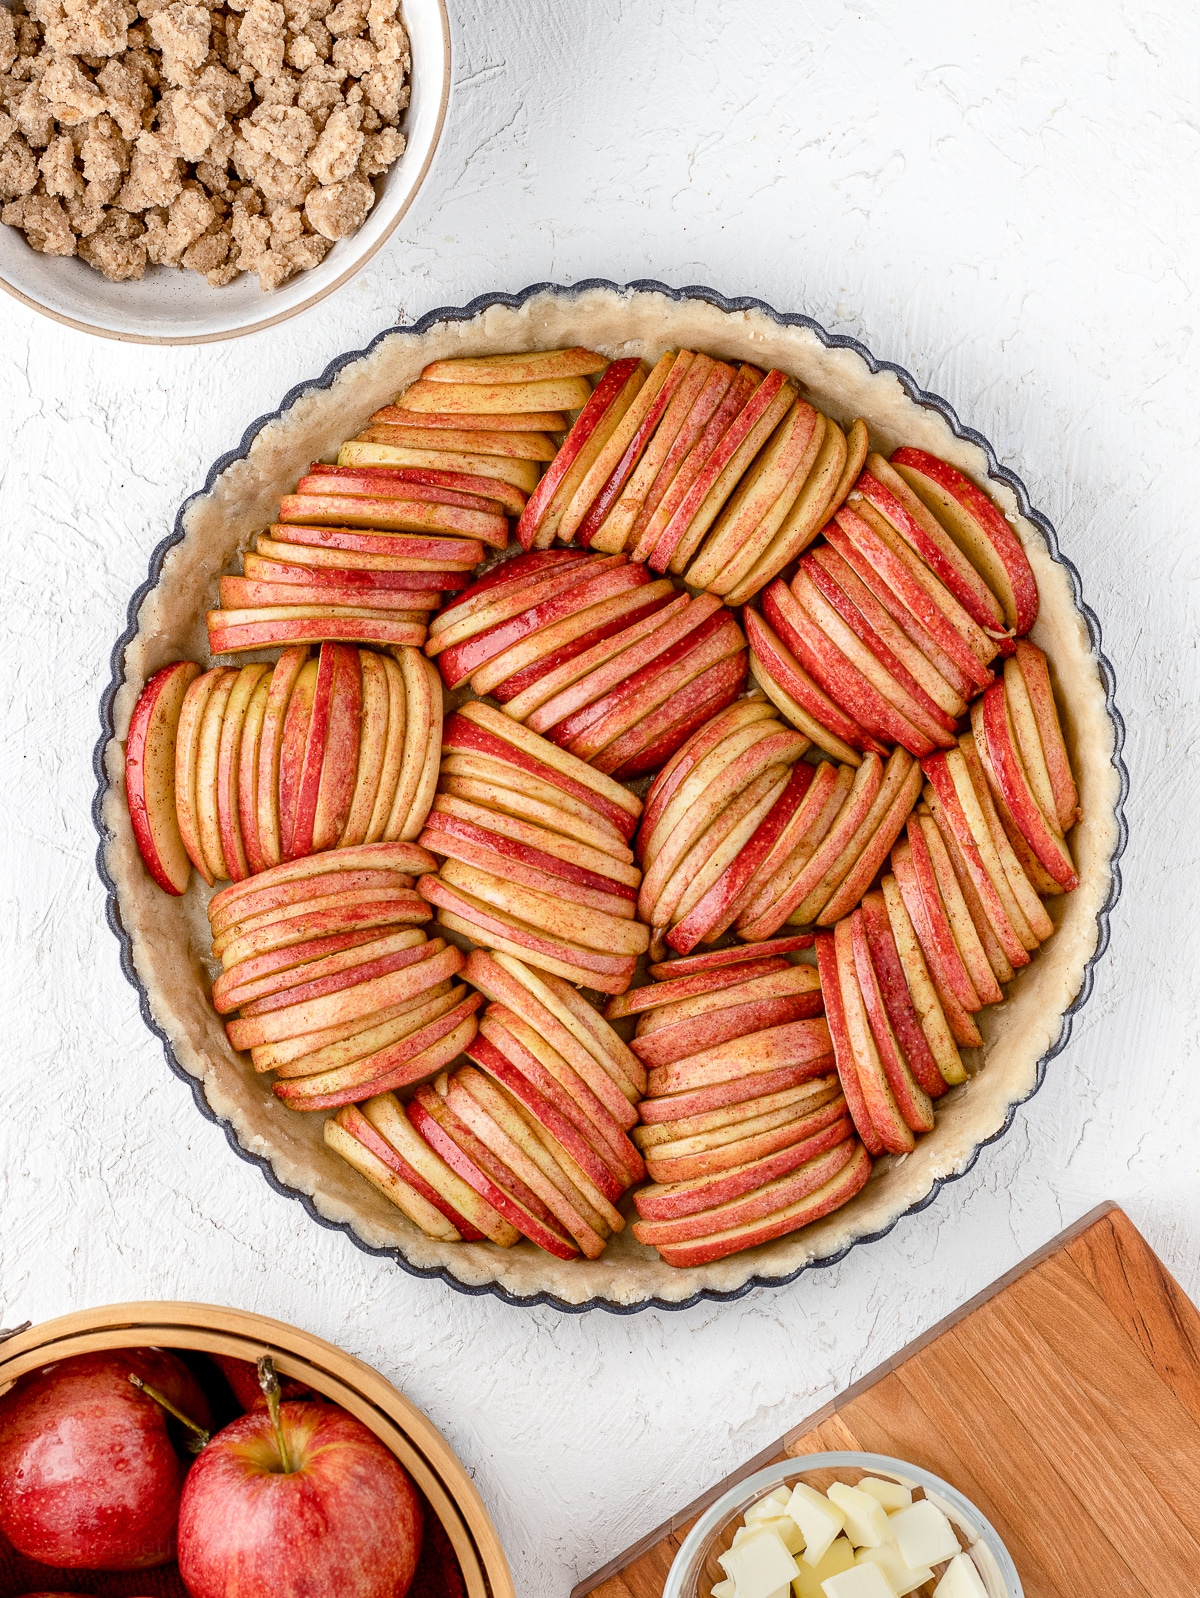 Apple slices arranged on top of the tart shell.